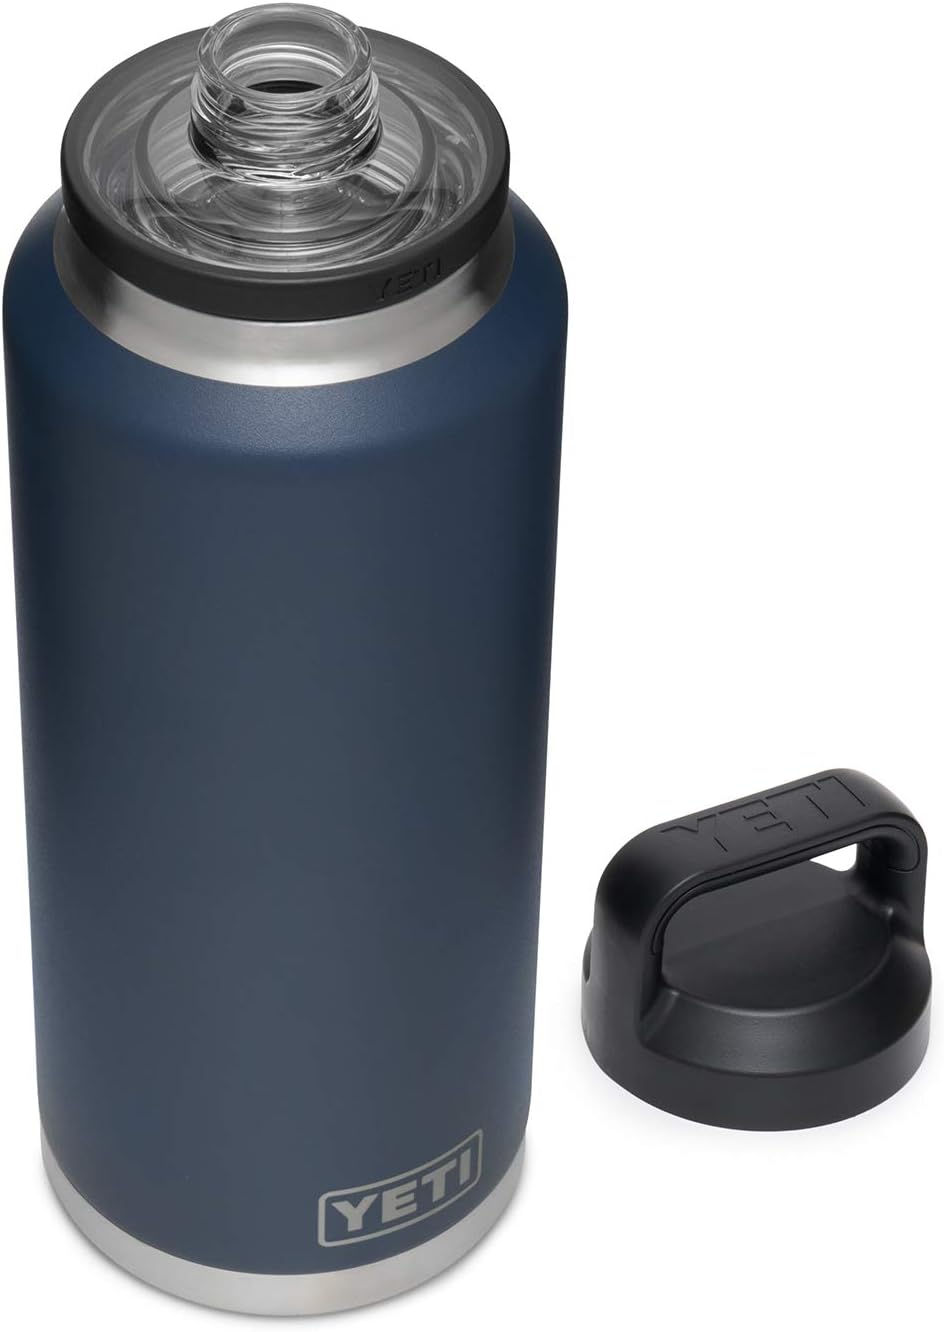 How Do Yeti Tumblers Work To Keep Beverages Cold Hot?